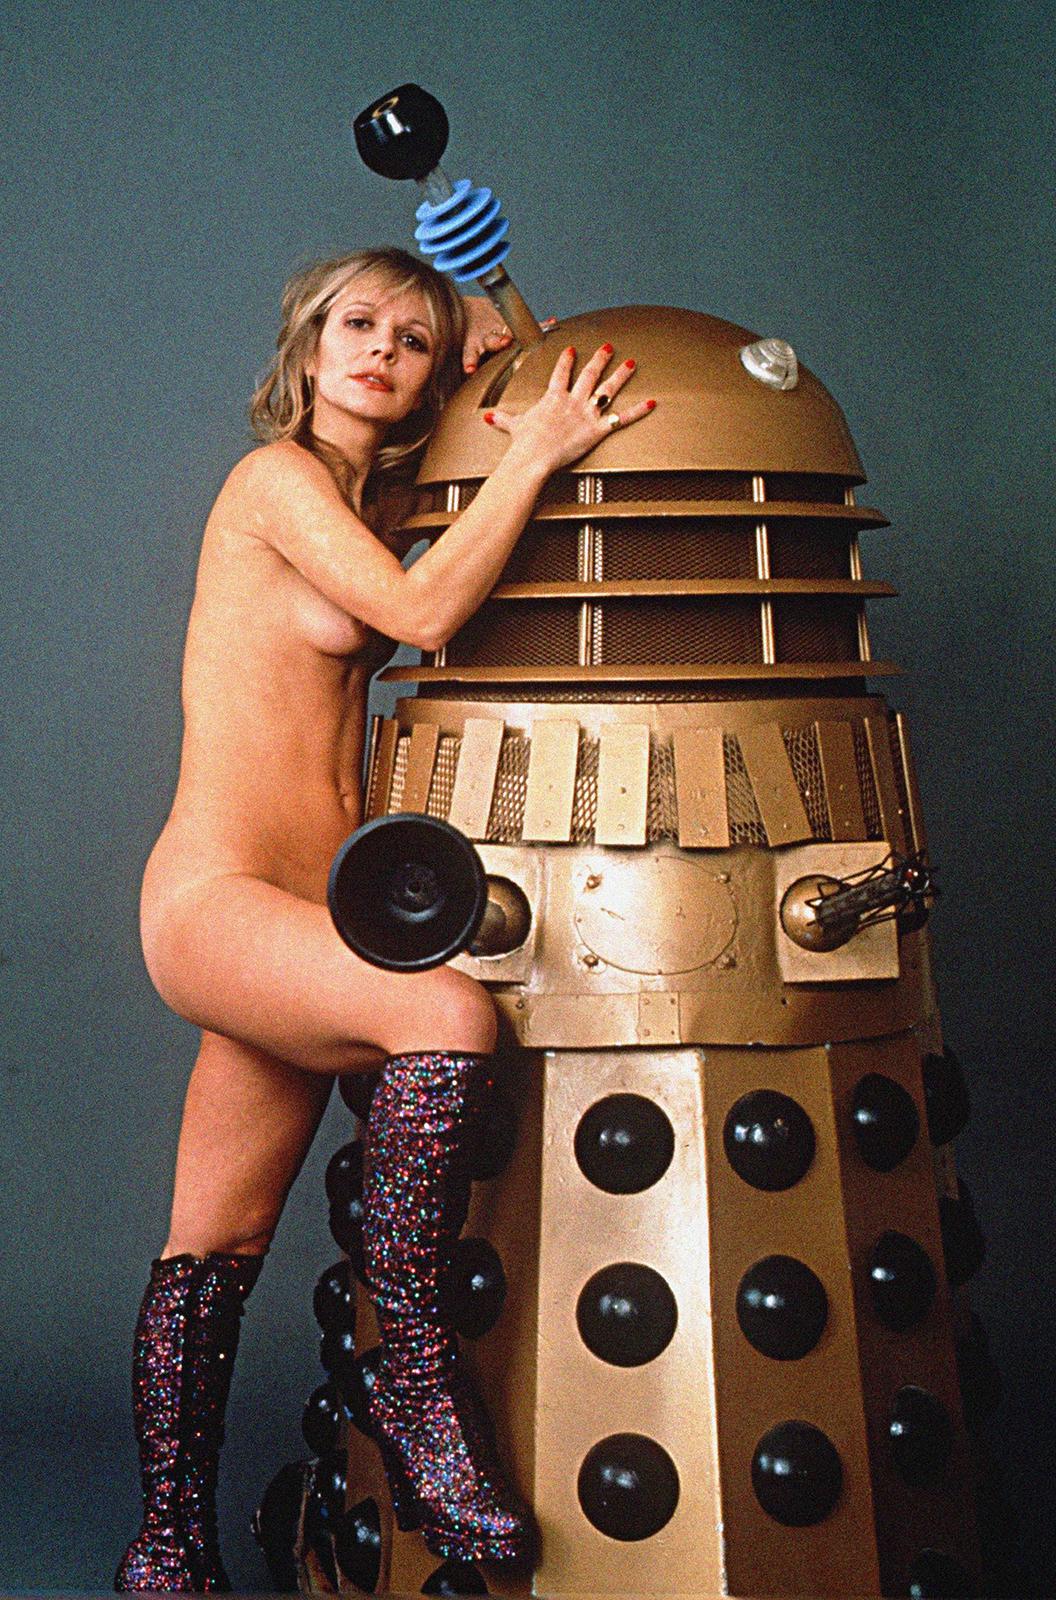 Former Doctor Who actress Katy Manning posing with a Dalek (1976).jpg